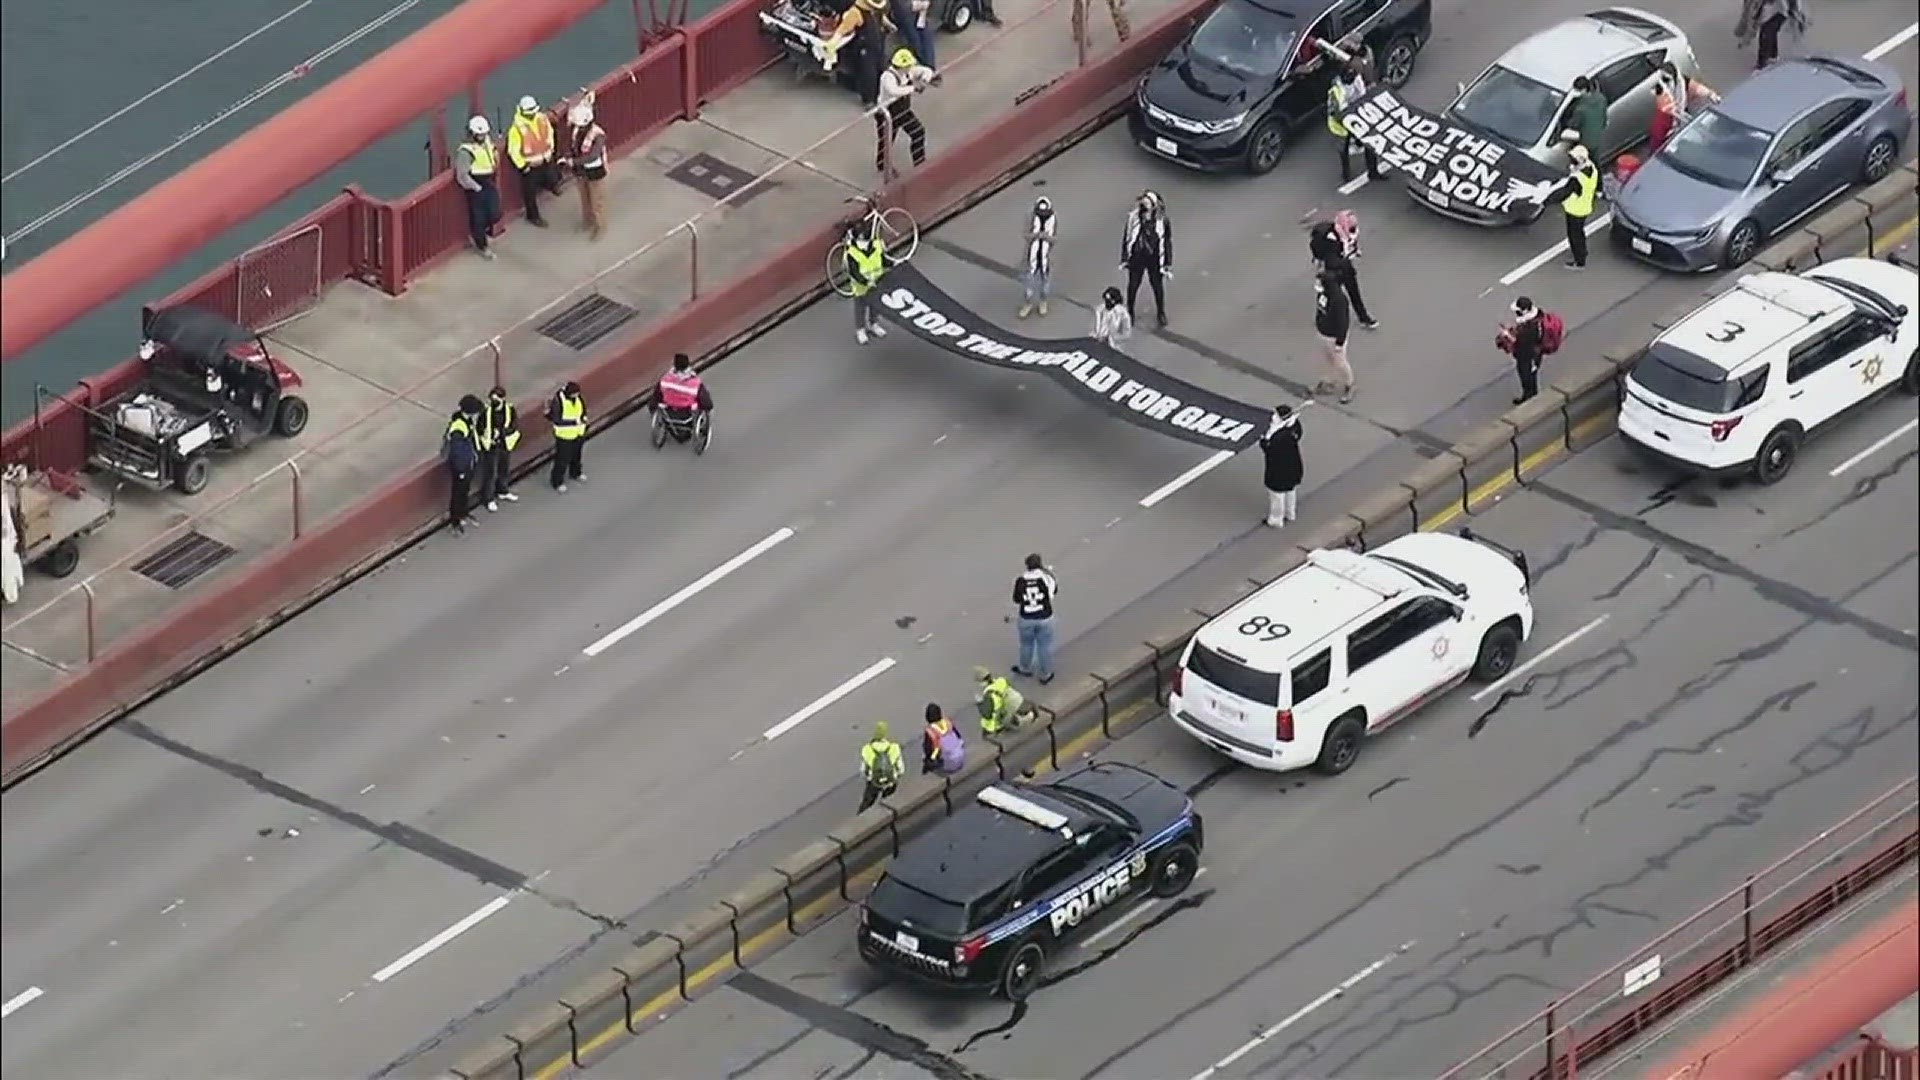 Some protesters on the Golden Gate Bridge held a black banner that read “Stop the world for Gaza.”